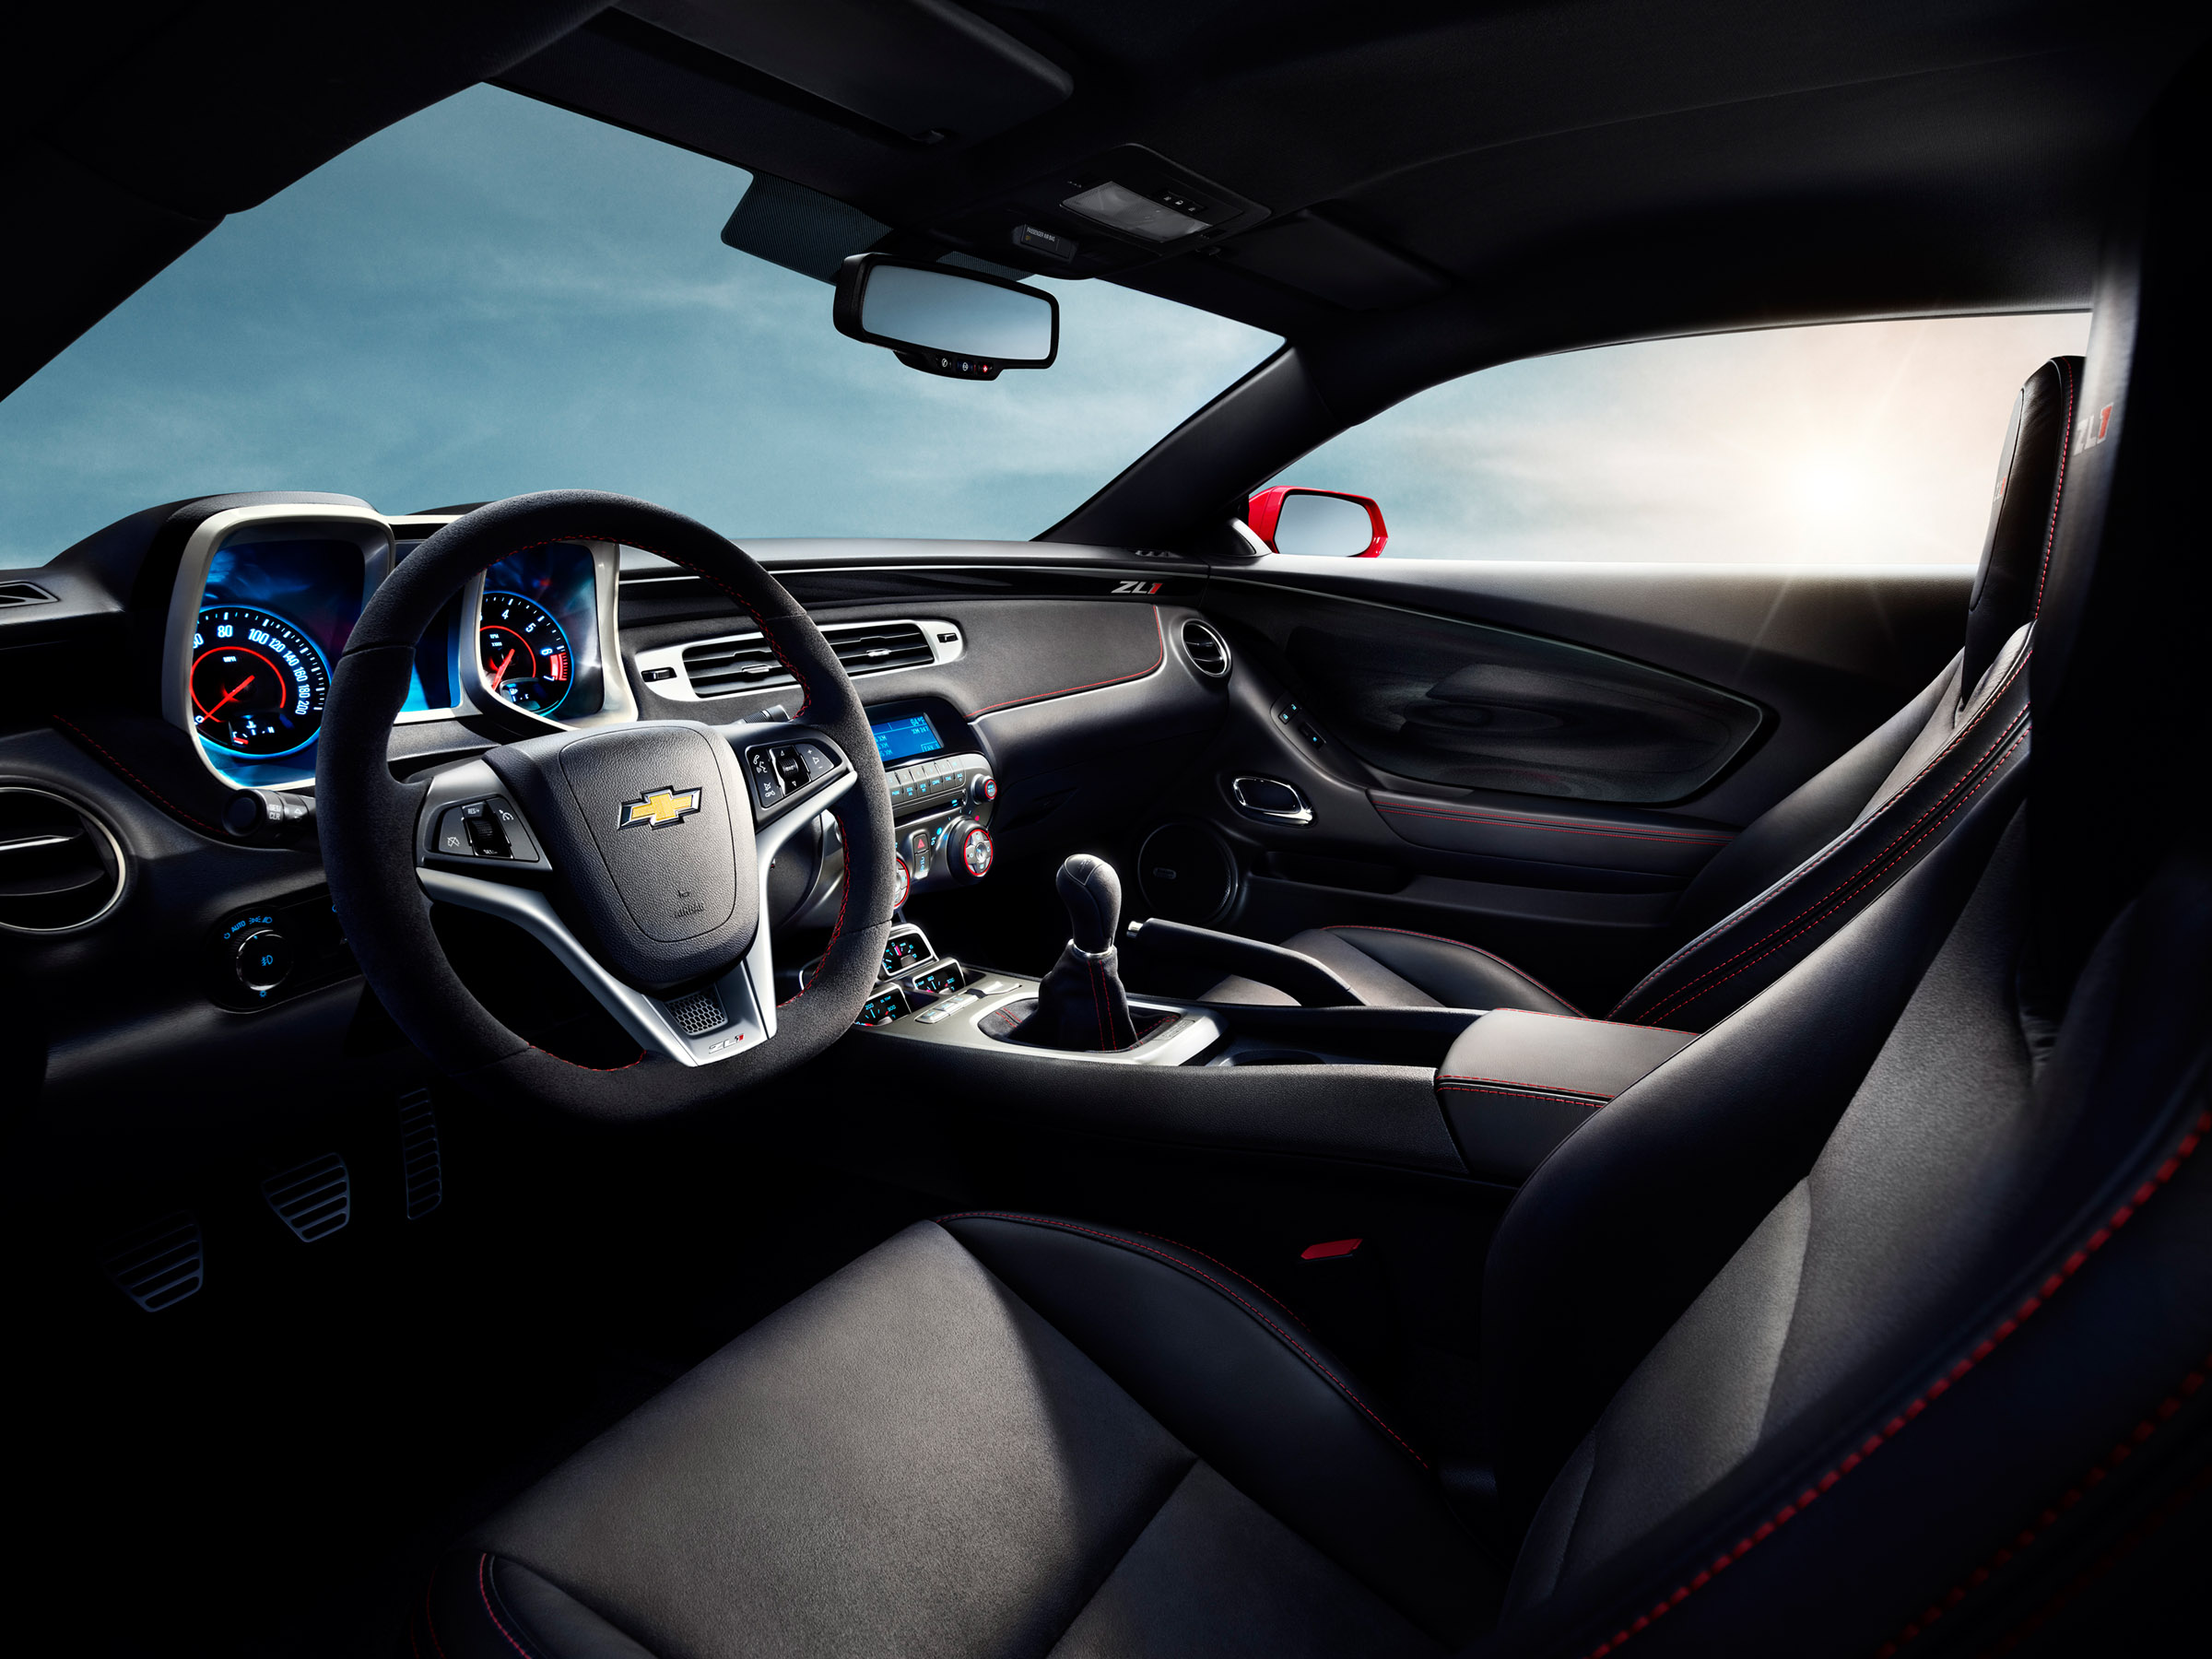 2012, Hennessey, Chevrolet, Camaro, Zl1, Tuning, Muscle, Interior Wallpaper